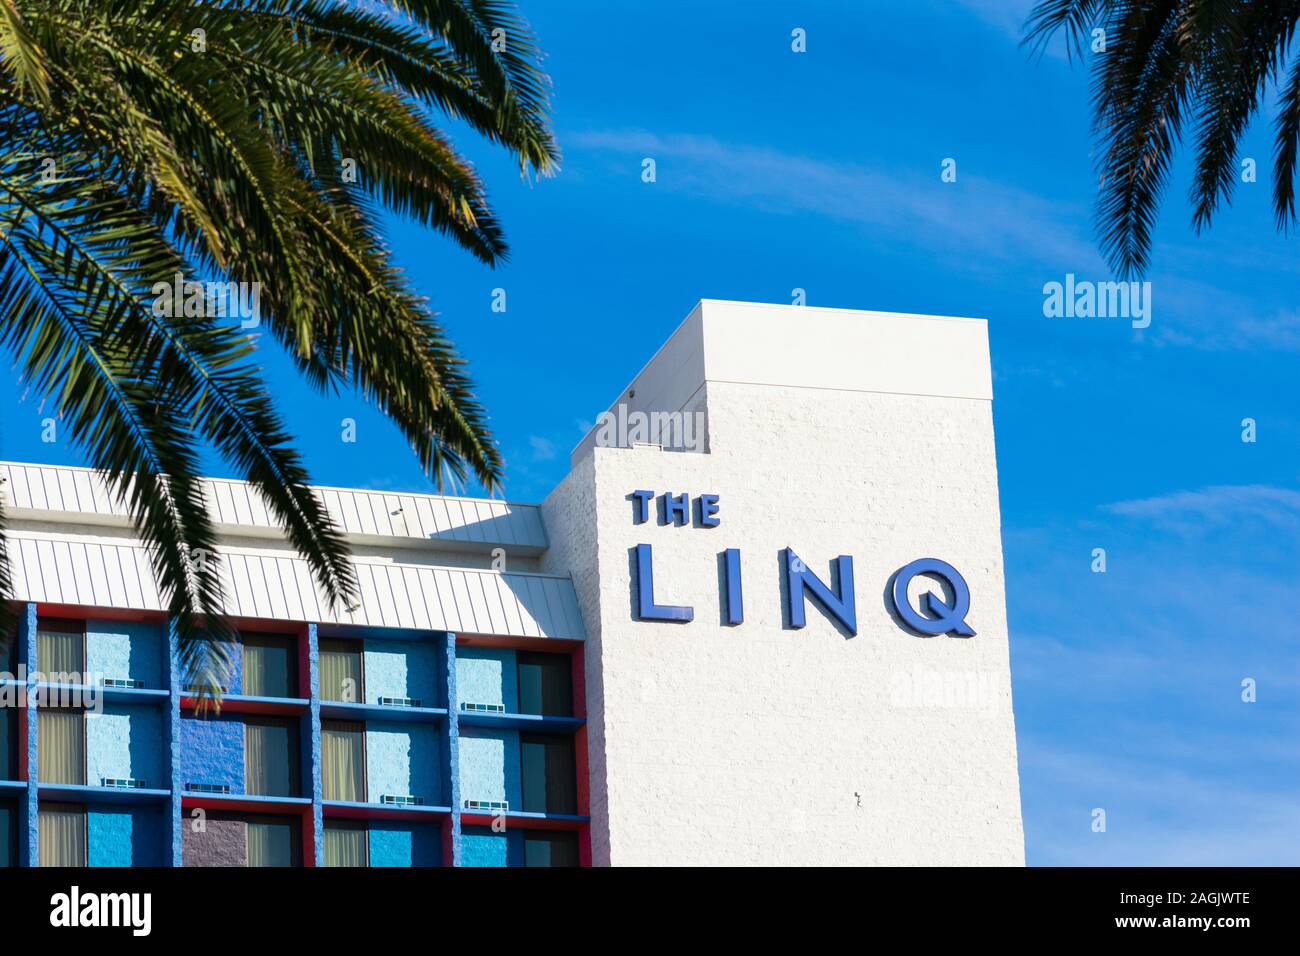 The LINQ hotel and casino resort sign as seen from Las Vegas Strip - Las Vegas, Nevada, USA - December, 2019 Stock Photo